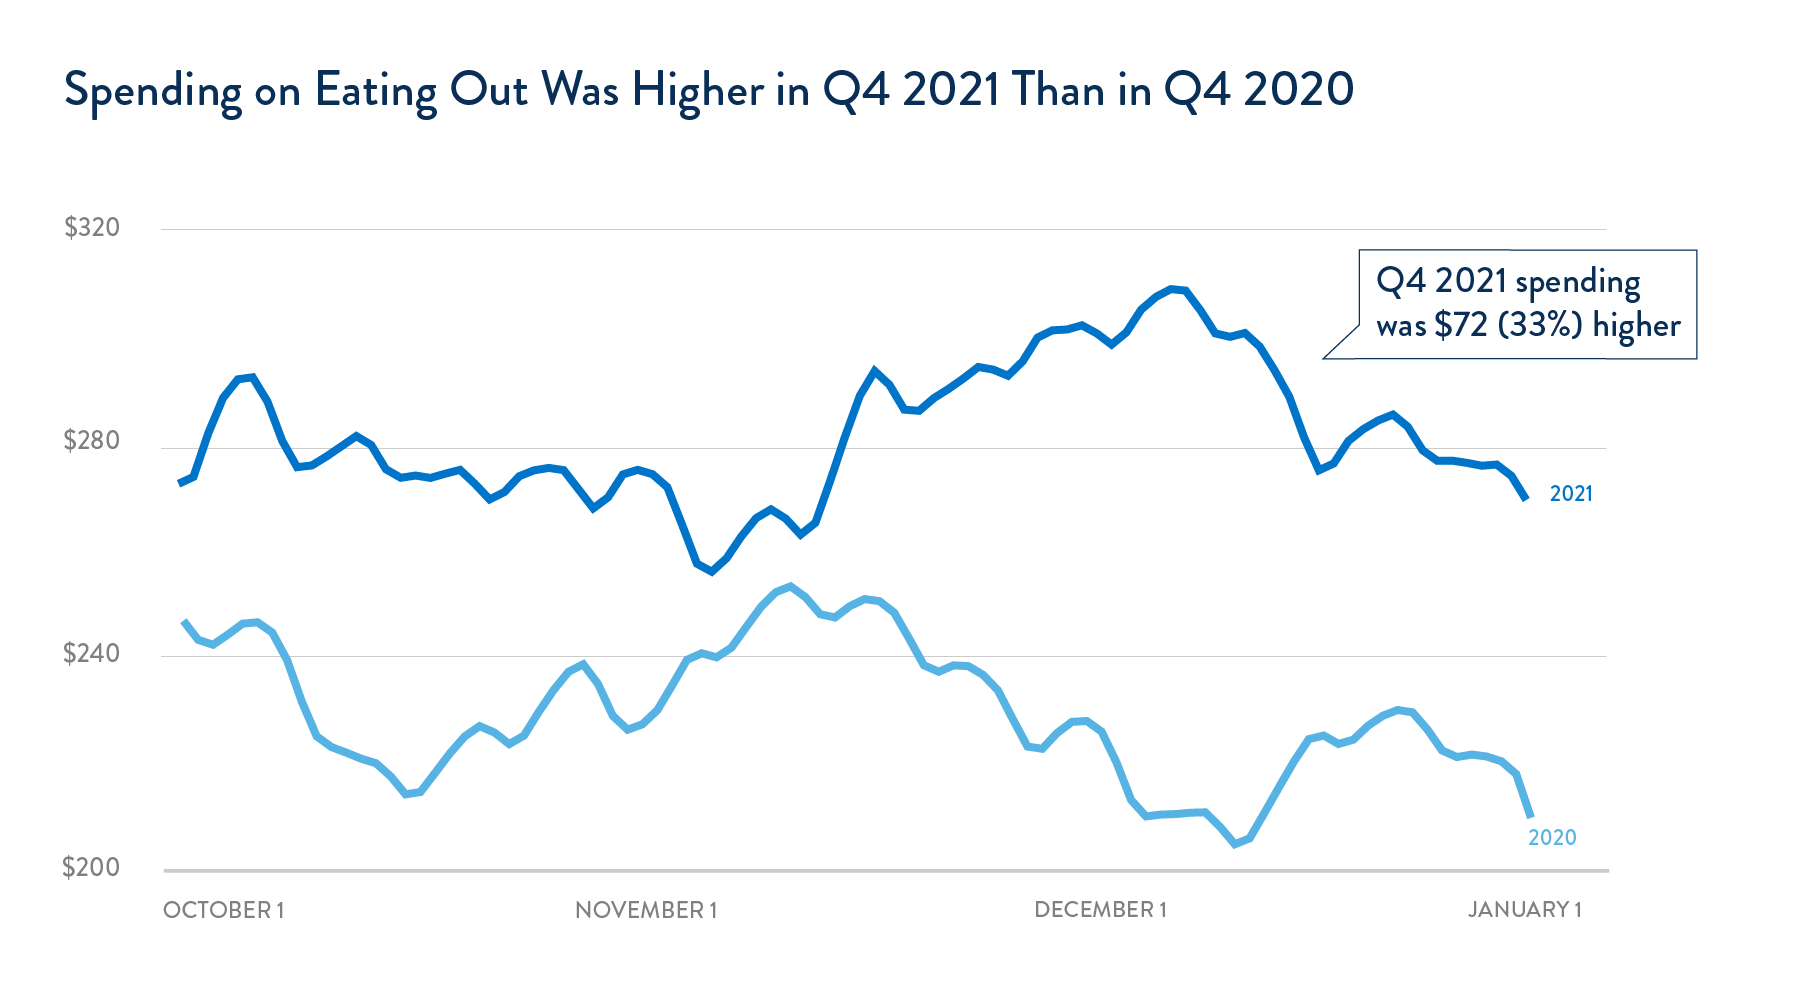 Spending on Eating Out Was Higher in Q4 2021 Than in Q4 2020